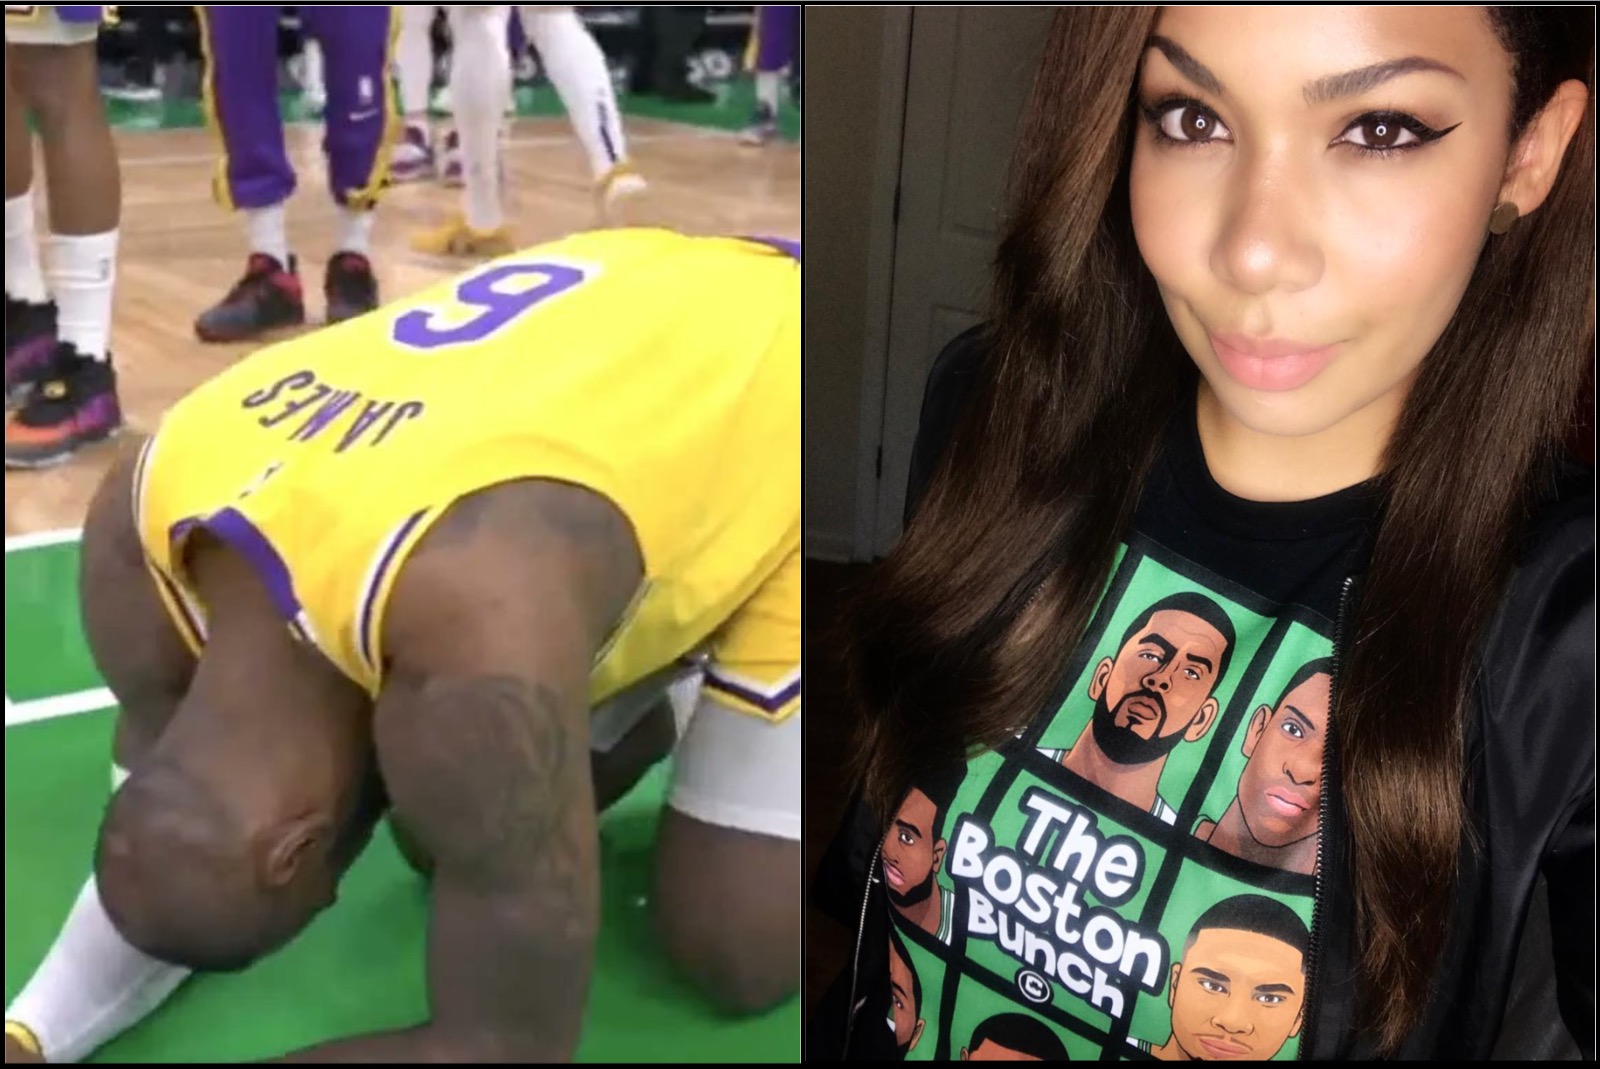 Al Horford’s Sister Anna Horford Is Receiving Threats Lakers Fans For Calling LeBron a Flopper